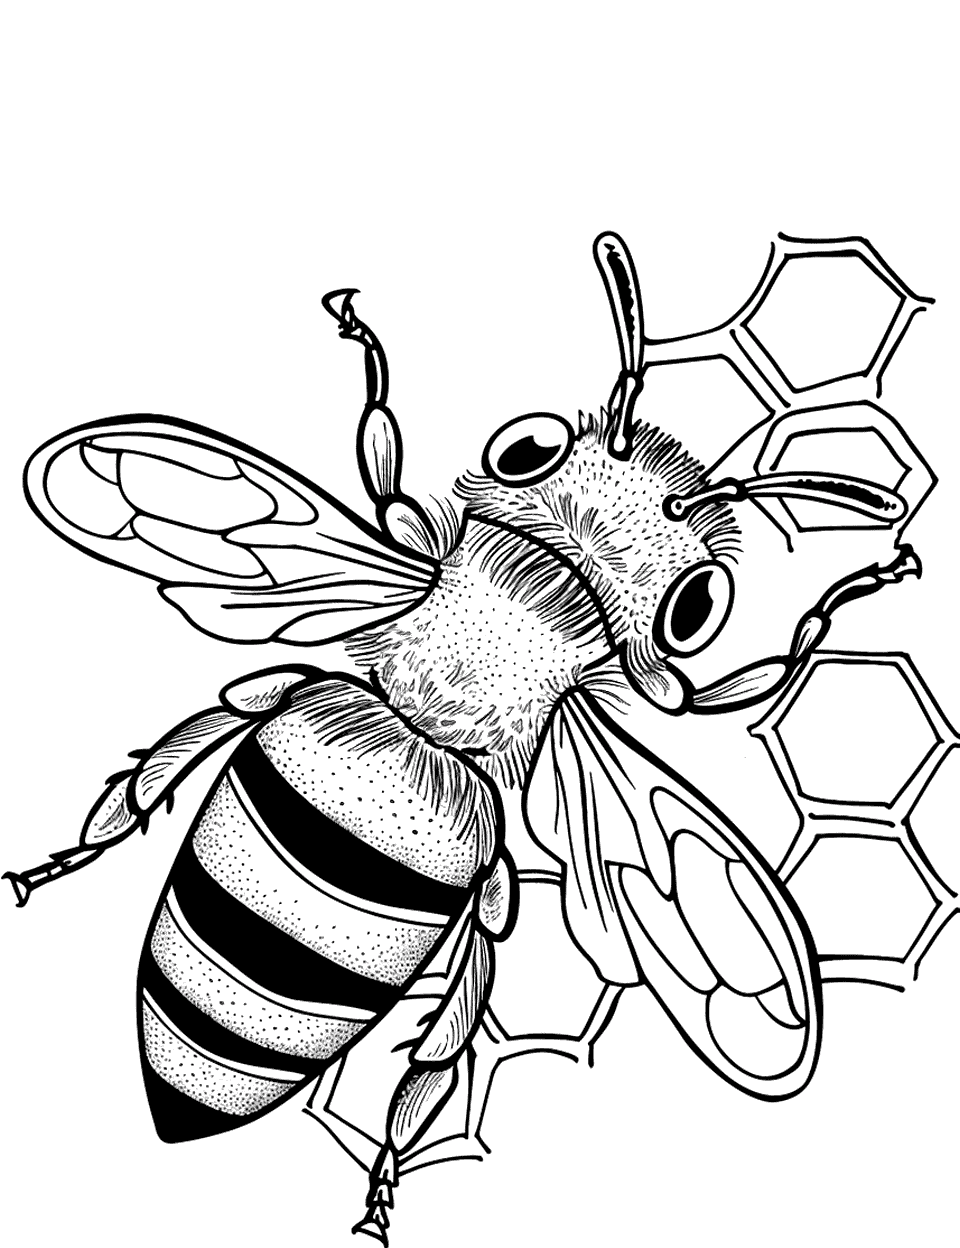 Honey Bee and Beeswax Coloring Page - A bee working on a beeswax structure inside the hive.